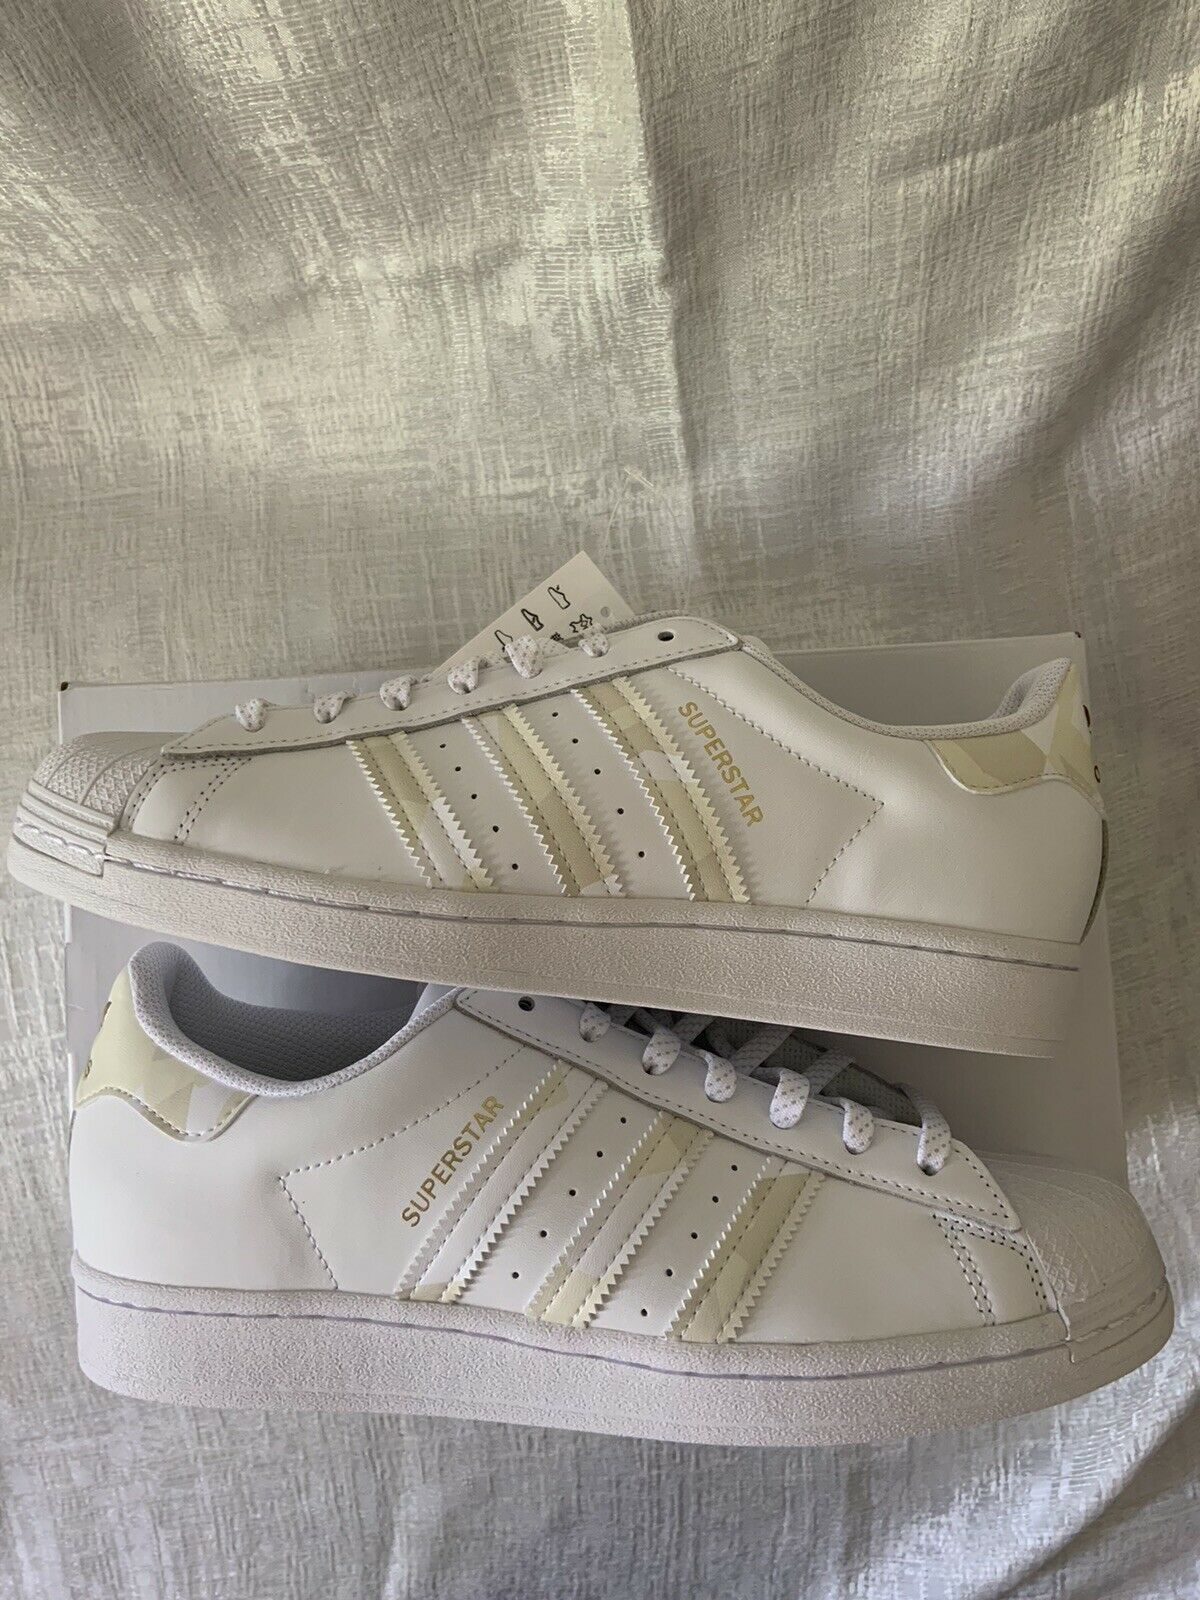 Adidas Originals Mens Superstar Shoes Sneakers White Gold Fashion Size 8.5 NEW